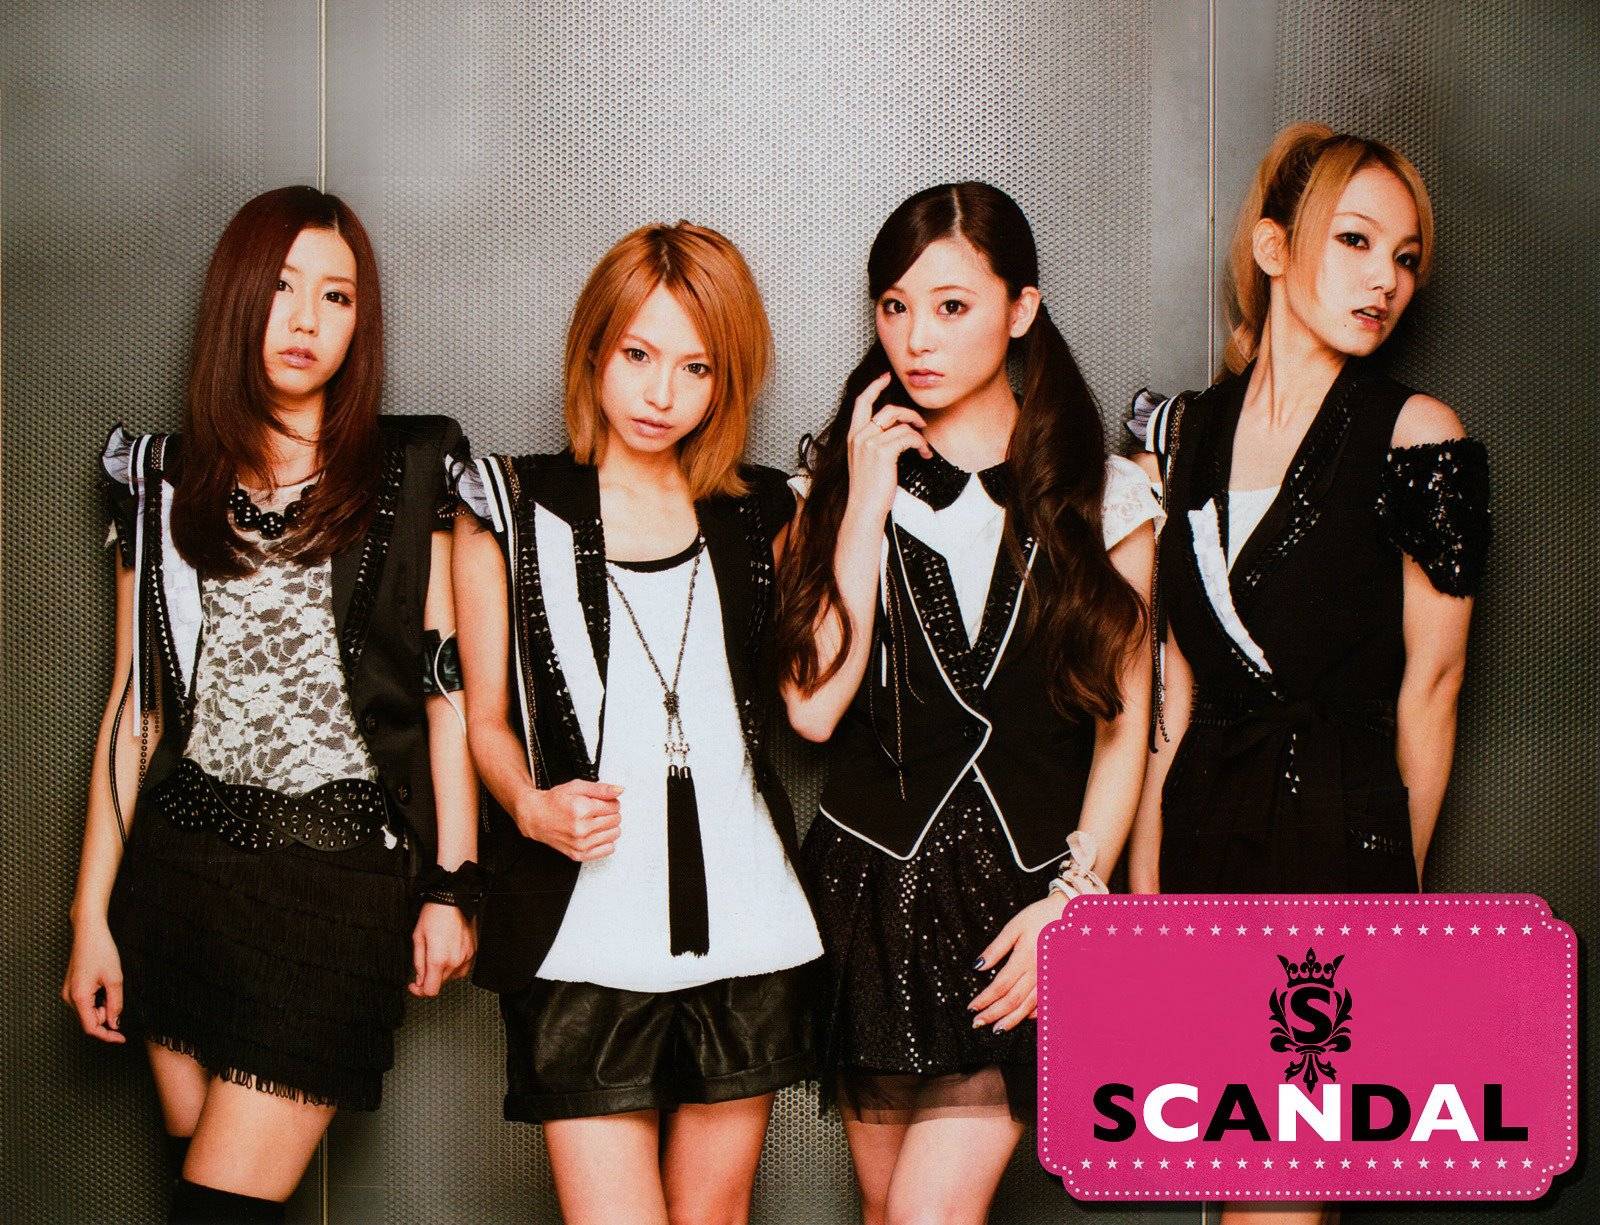 Best image about Scandal Band. Scandal japanese